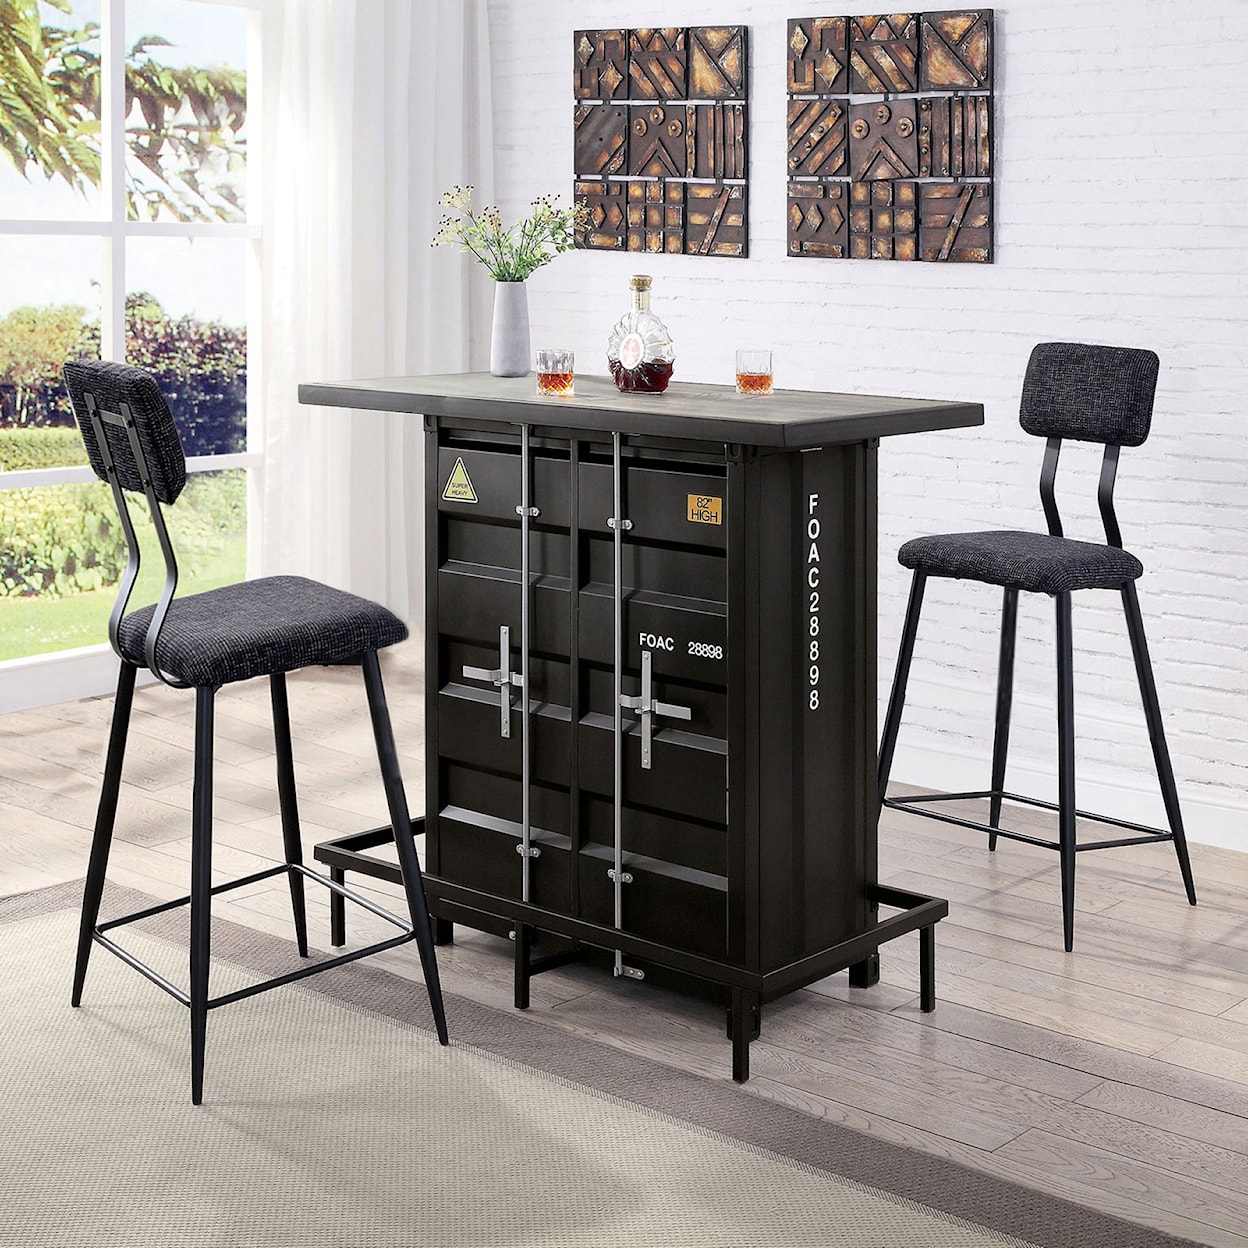 Furniture of America Esdargo 3-Piece Bar Height Table Set